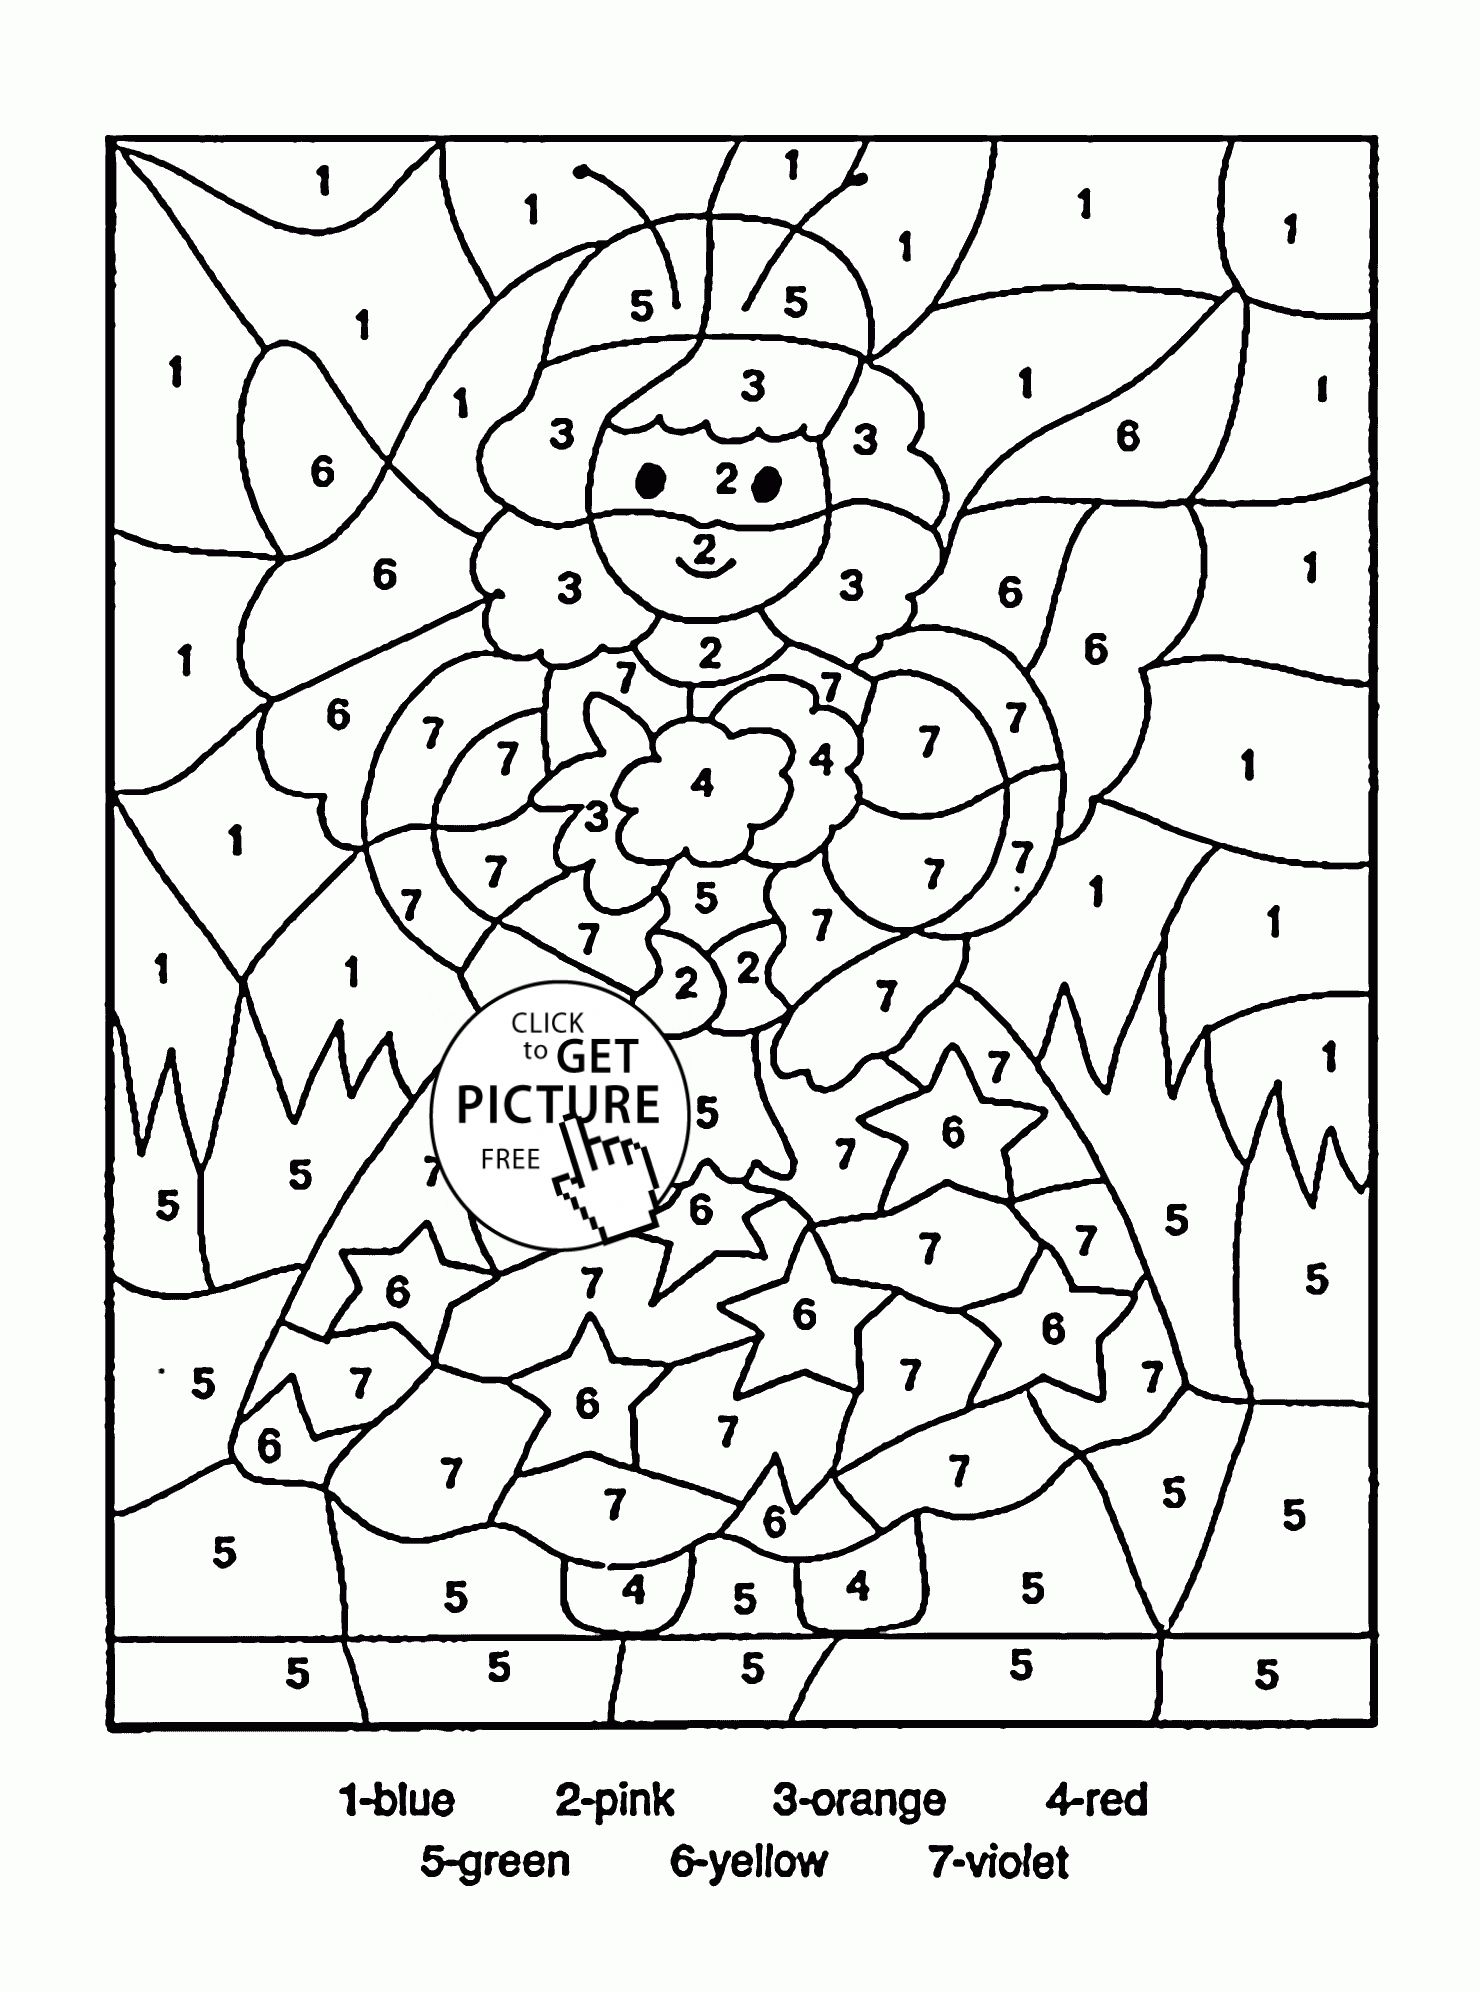 educational coloring sheets color by number little fairy coloring page for kids coloring sheets educational 